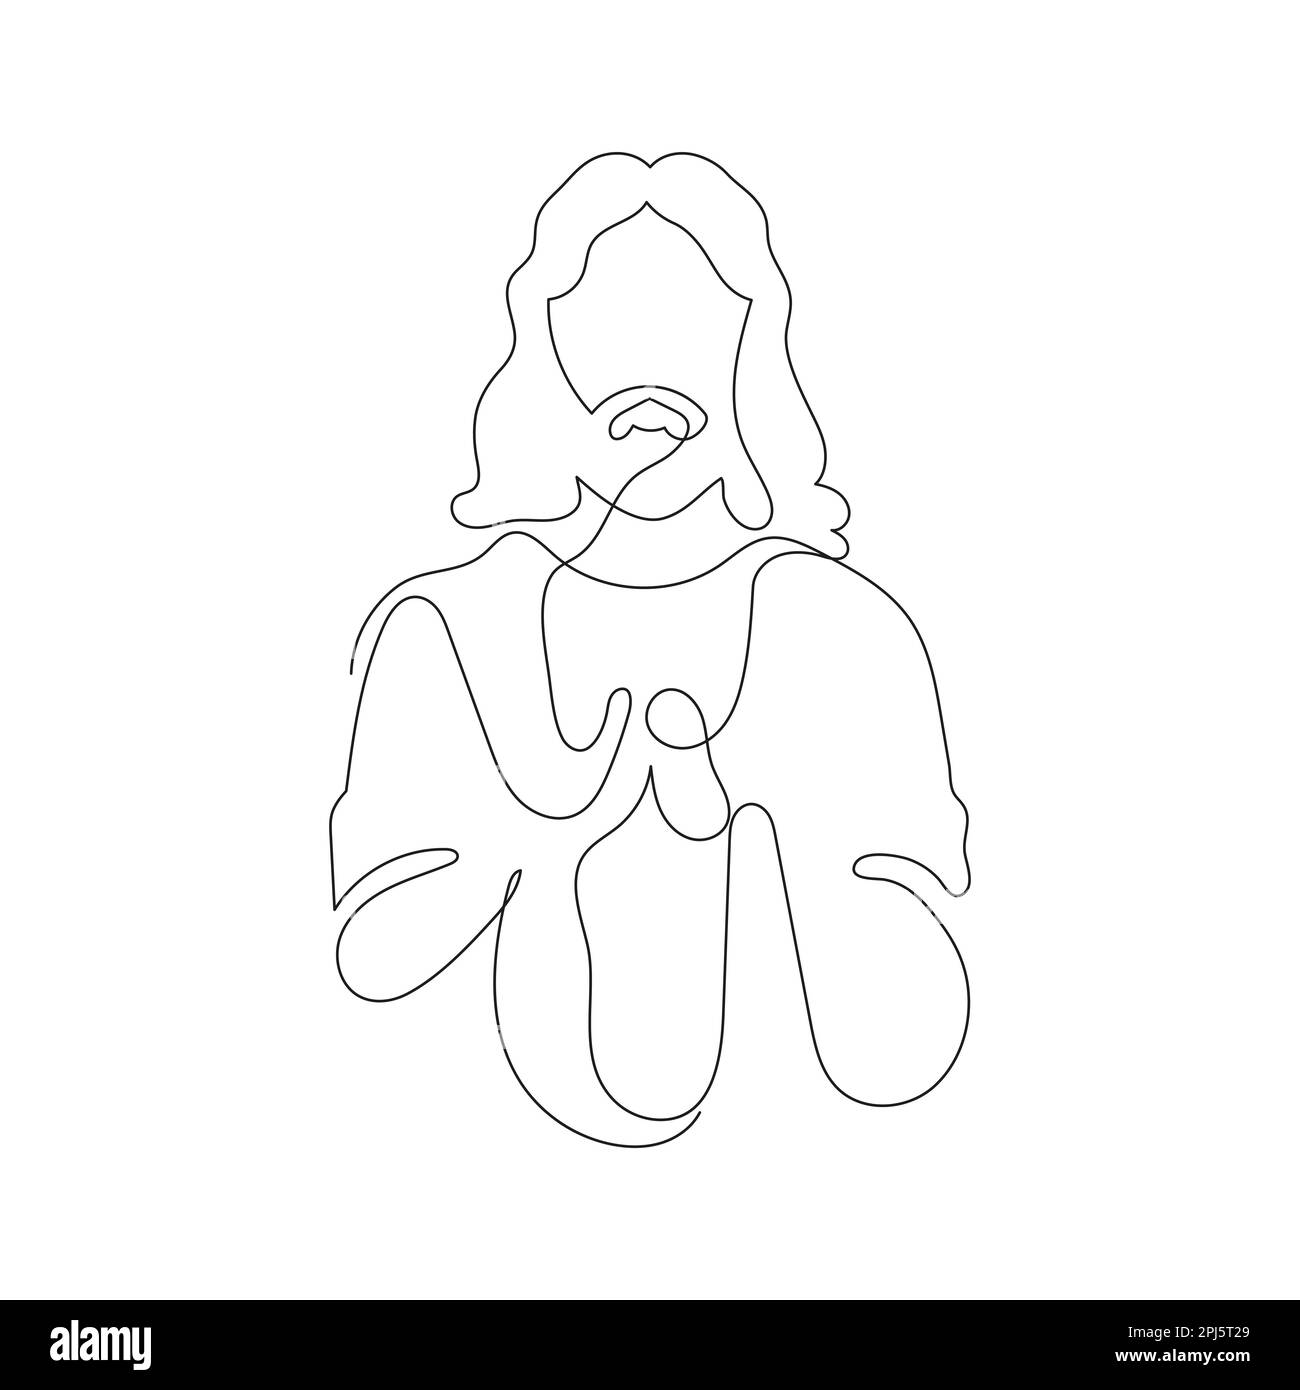 Continuous line drawing of Jesus Christ, son of God, biblical easter illustration. Stock Vector